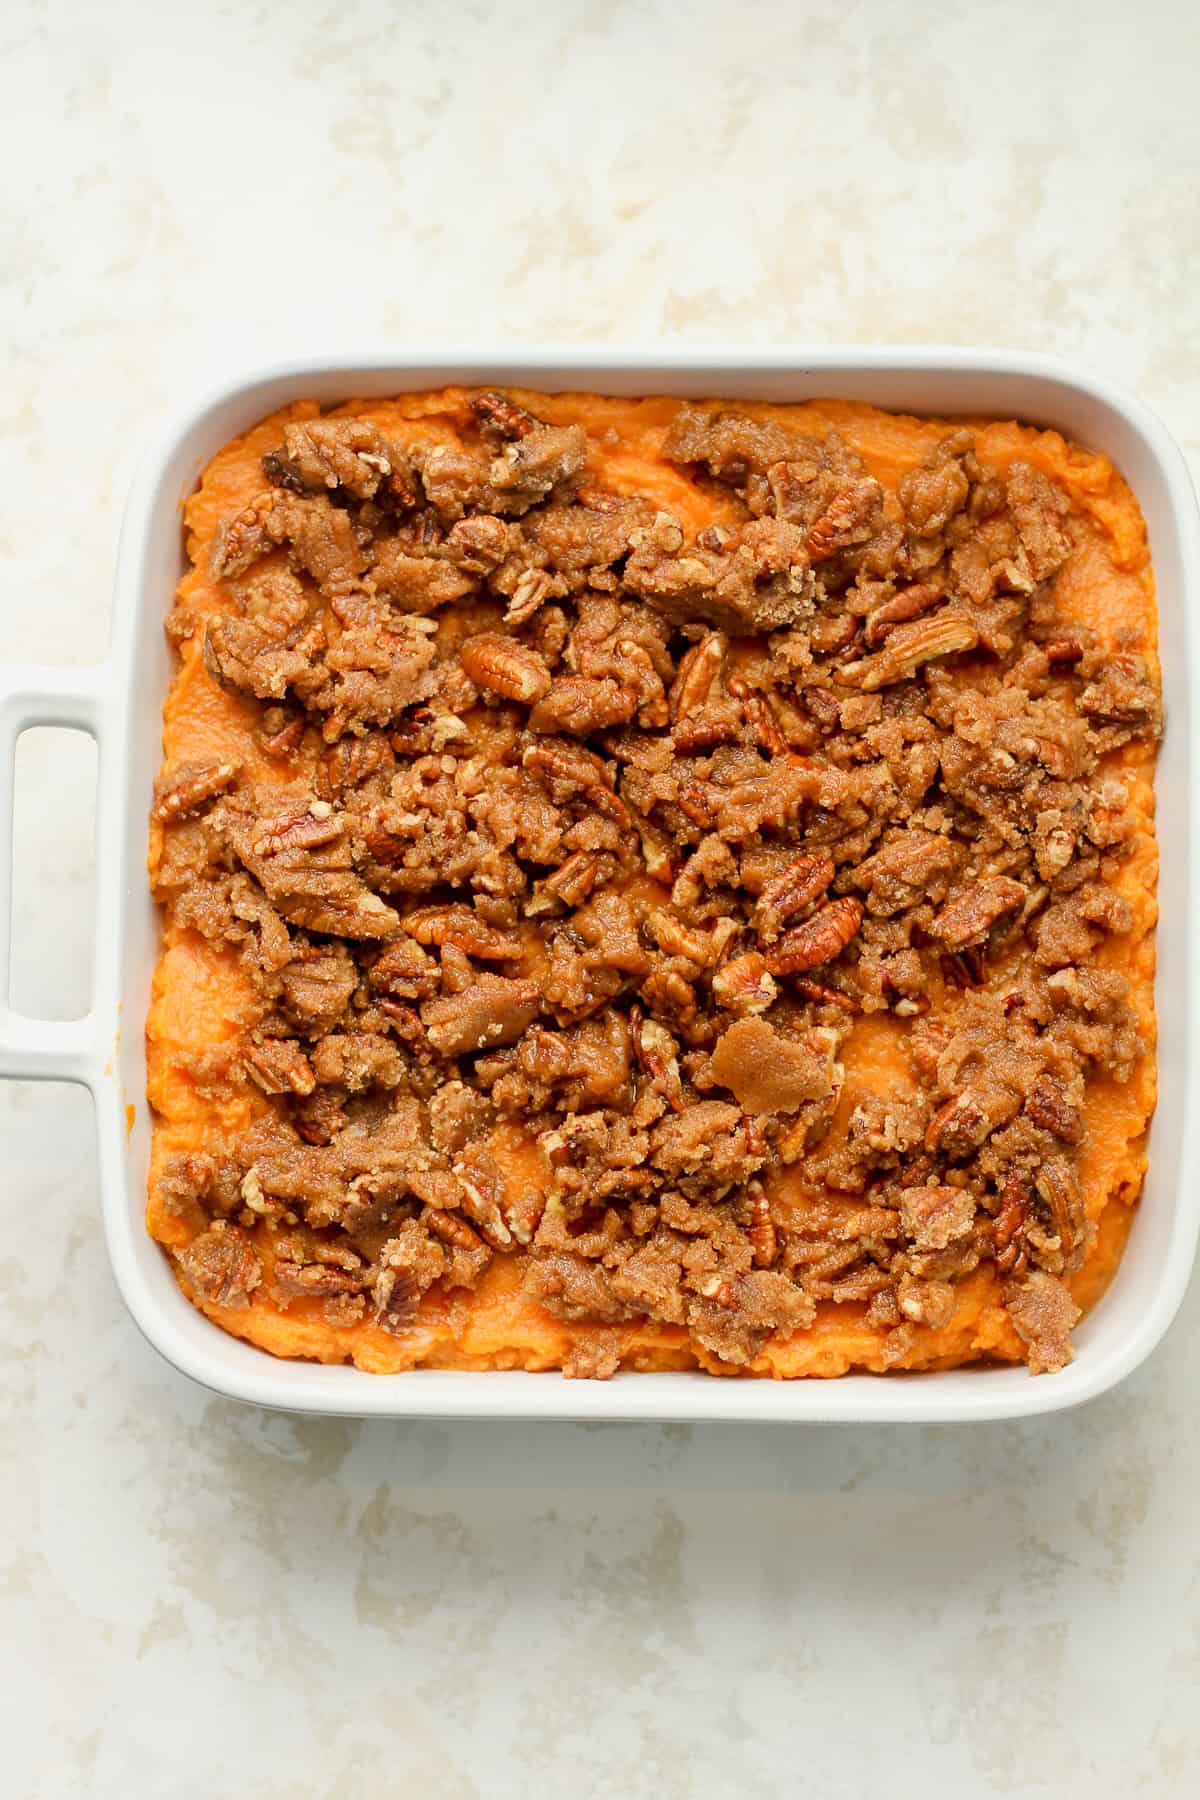 The sweet potato casserole with the crumble added on.